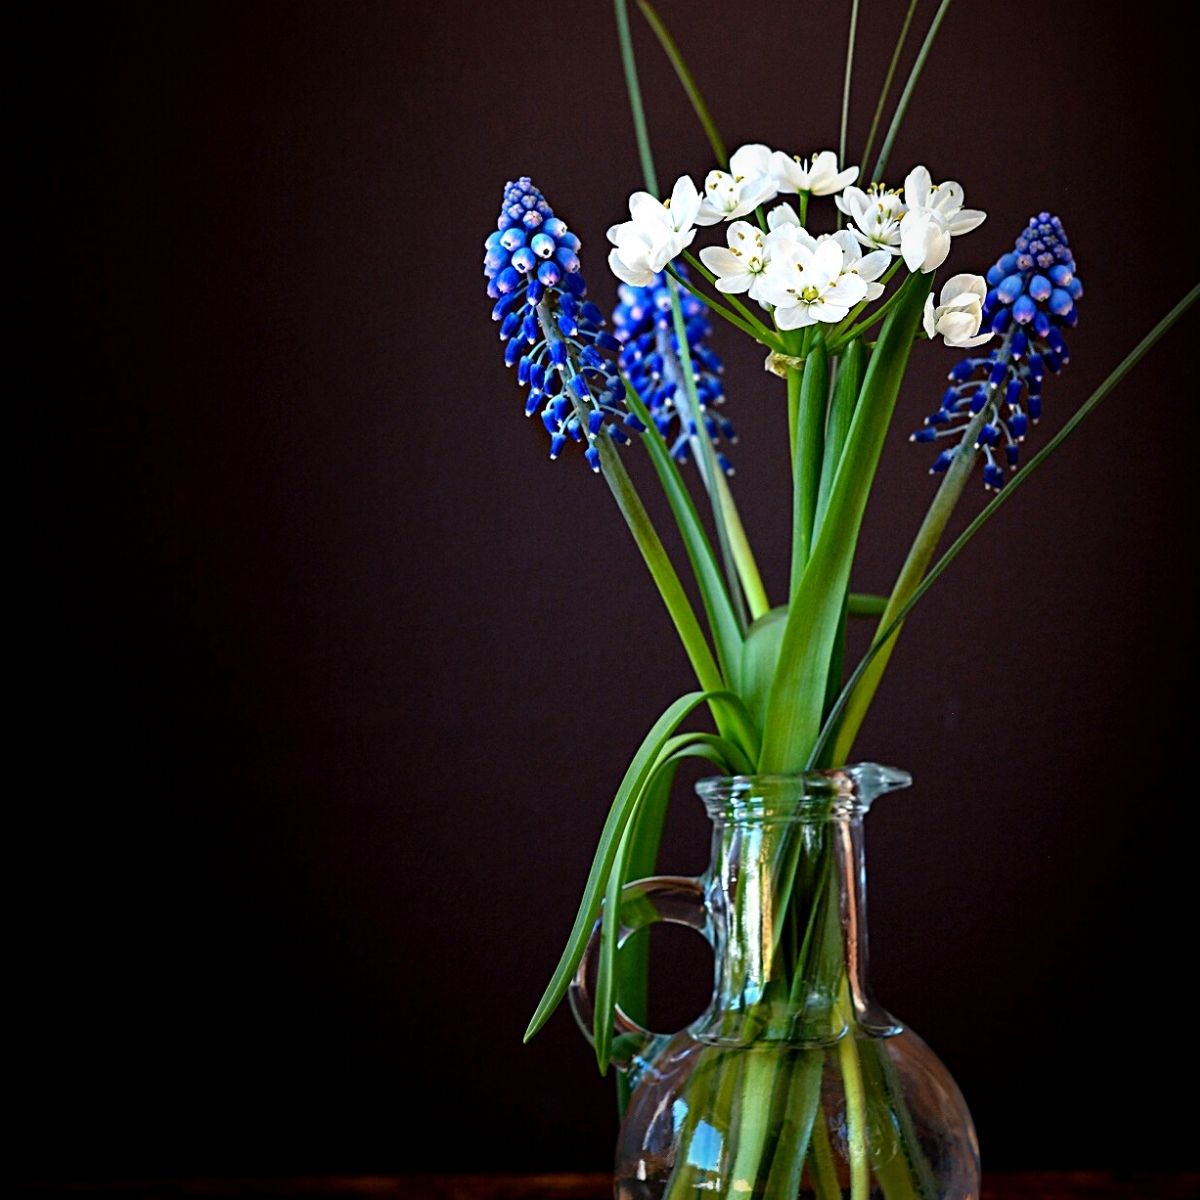 Hyacinths planted in a jar of water